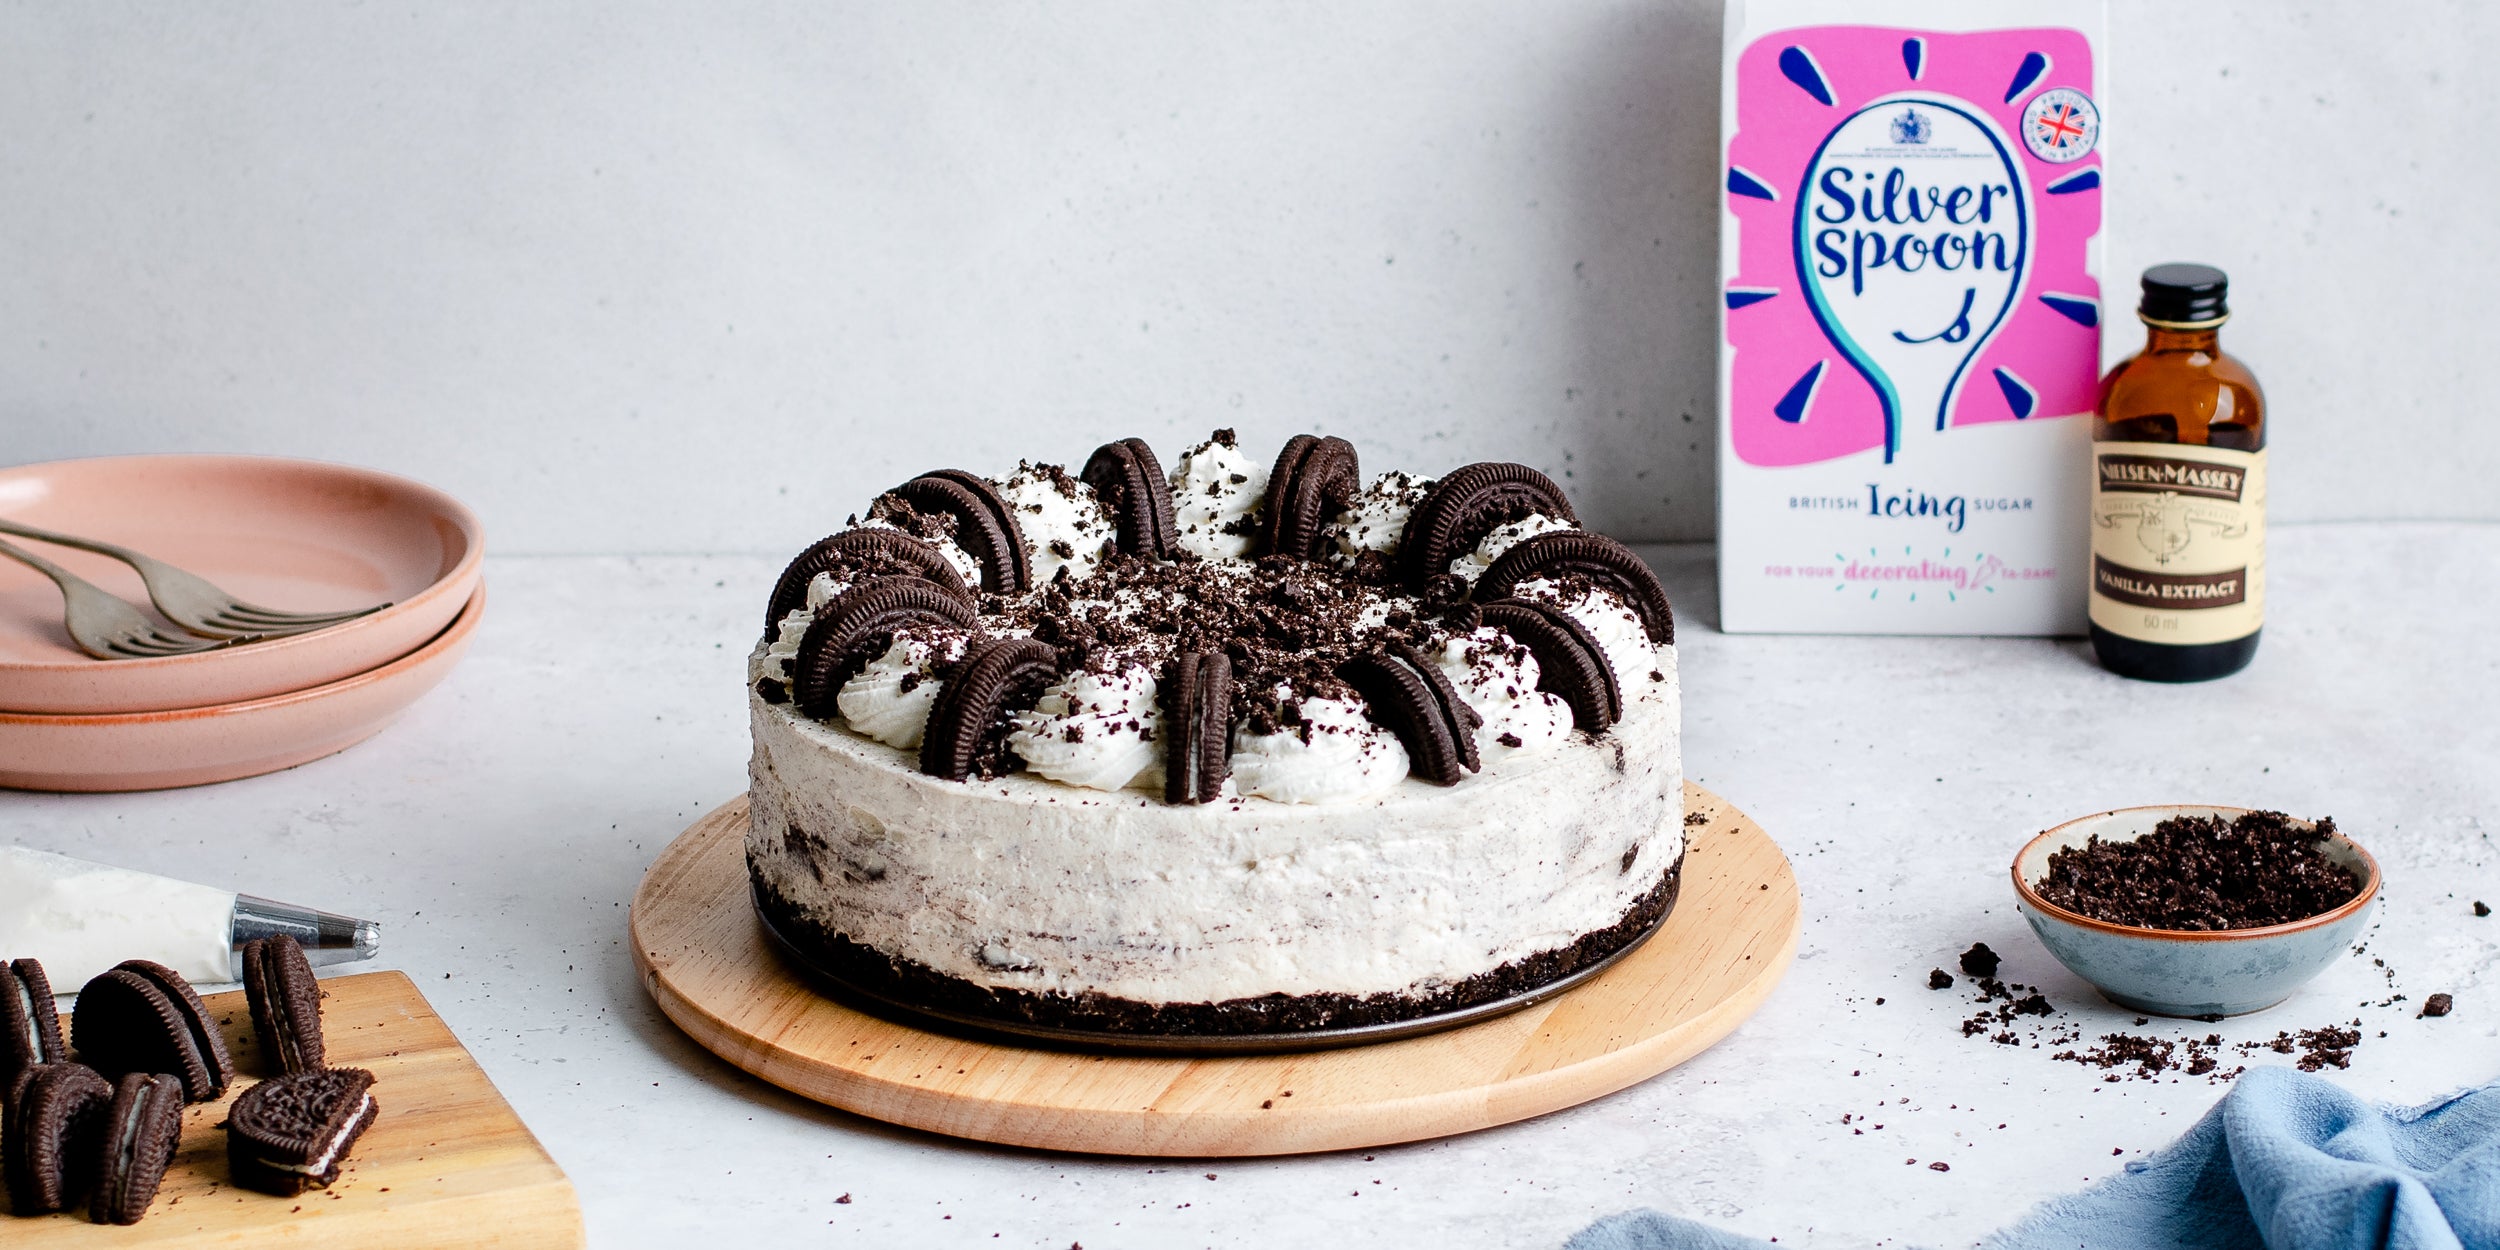 No-bake Oreo cheesecake on wooden plate with icing sugar, vanilla extract and Oreo cookies